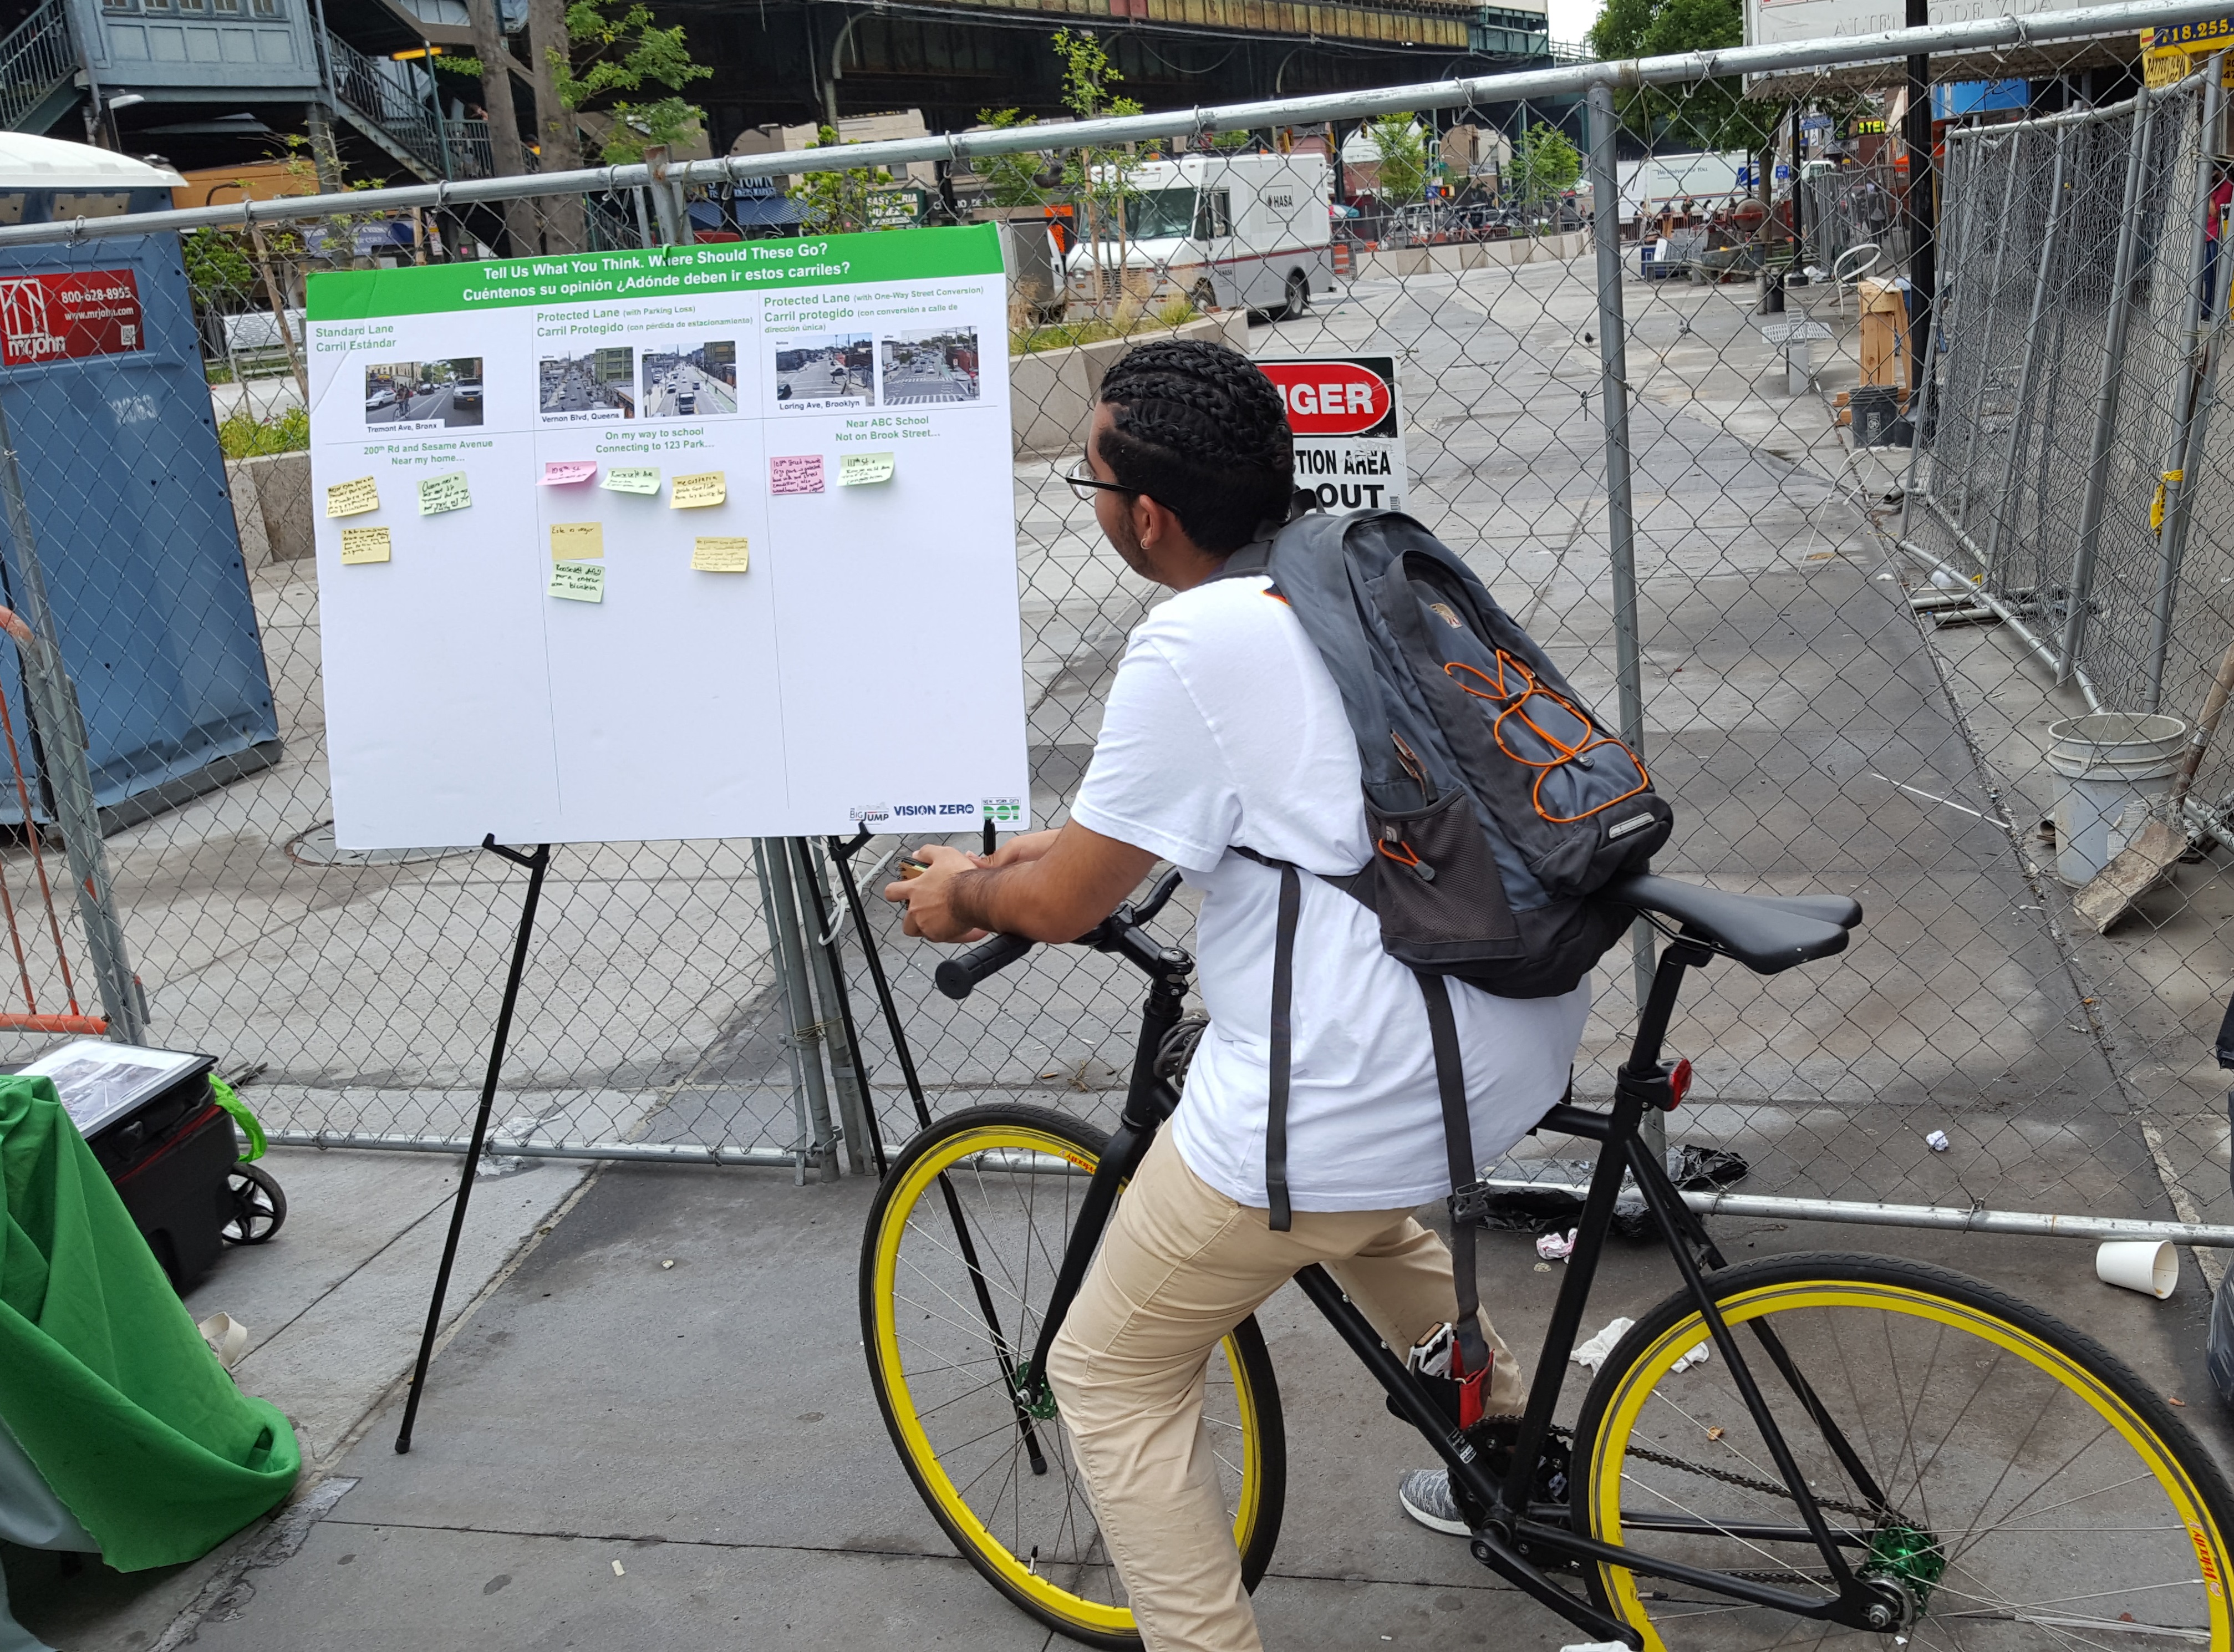 Cyclist looking up reading a board